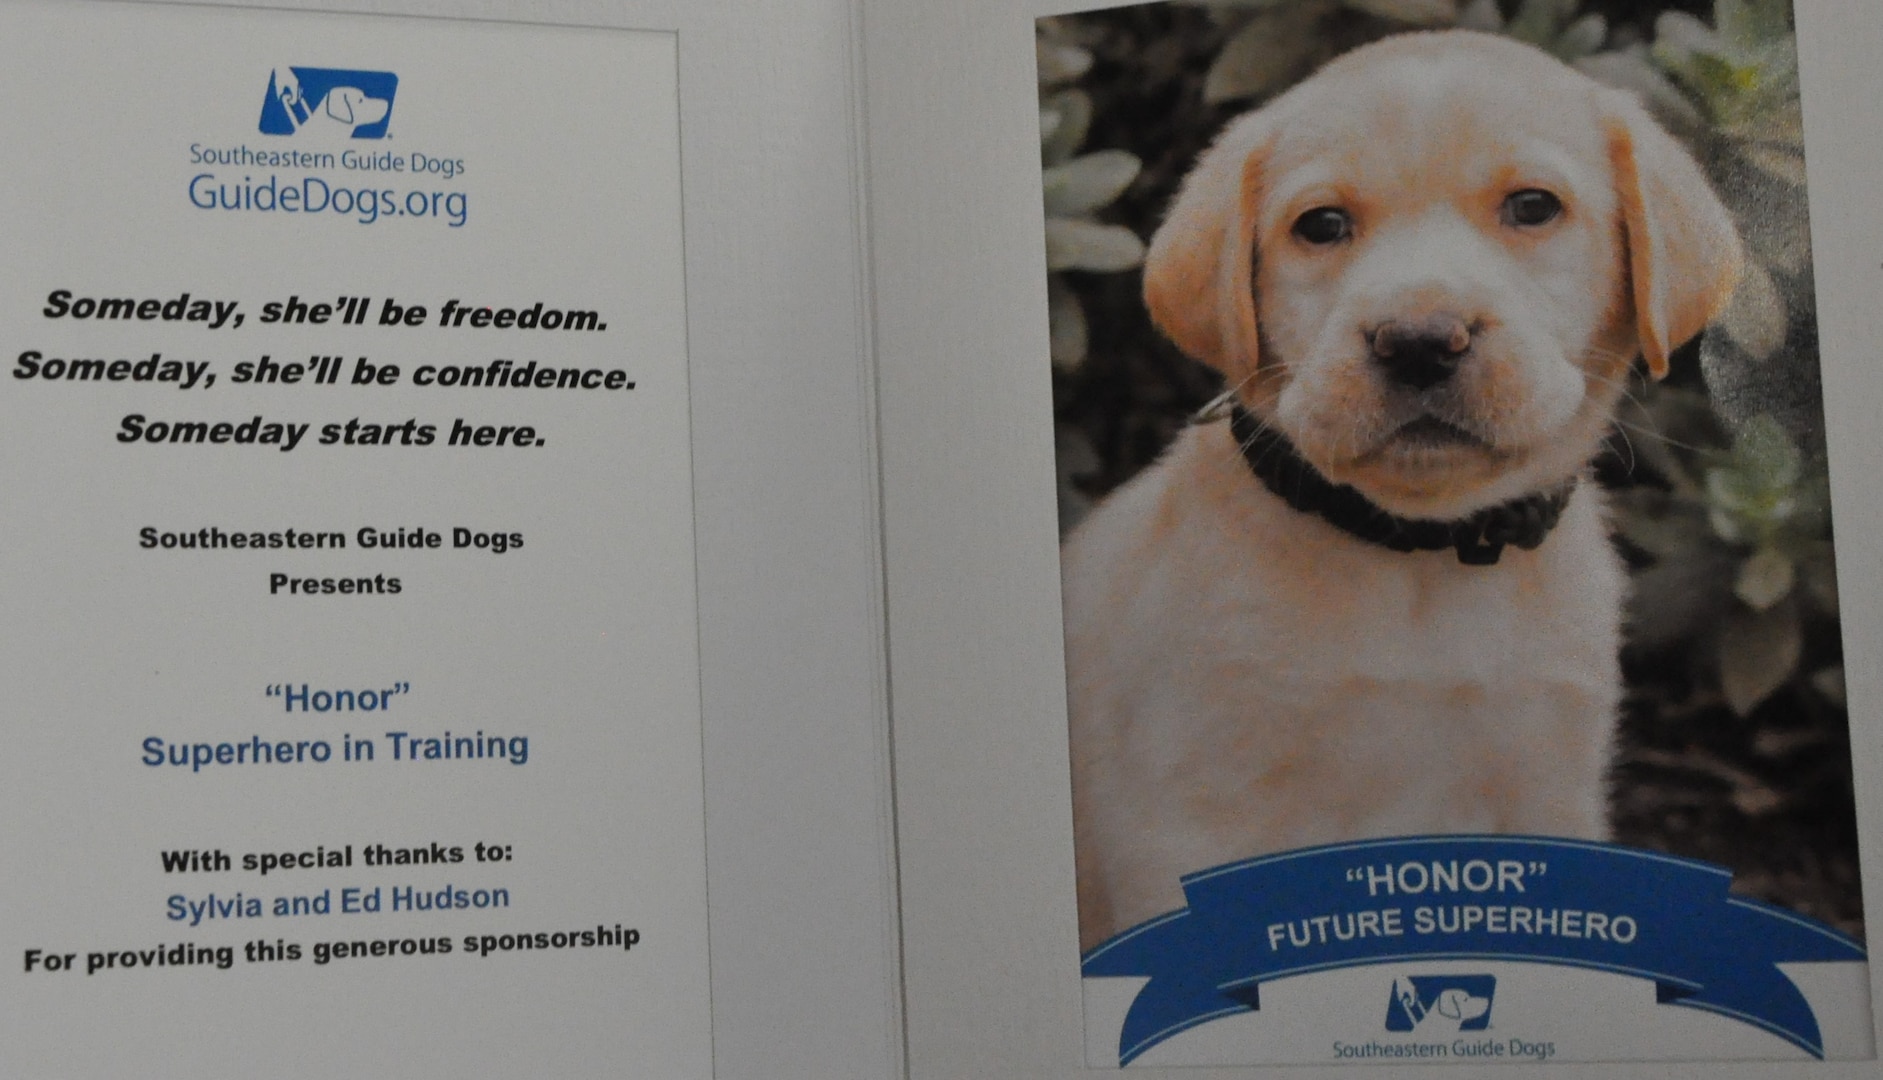 IMAGE: DAHLGREN, Va. (Dec. 11, 2019) – Honor was a ‘Superhero in Training’ thanks to Ed and Sylvia Hudson, who have raised her through the Southeastern Guide Dogs’ tele-raiser program. Hudson – Cyber Technologies and Software Systems Division head at Naval Surface Warfare Center Dahlgren Division – and his wife have raised guide dogs through the nonprofit in Florida for more than a decade. (U.S. Navy photo/Released)